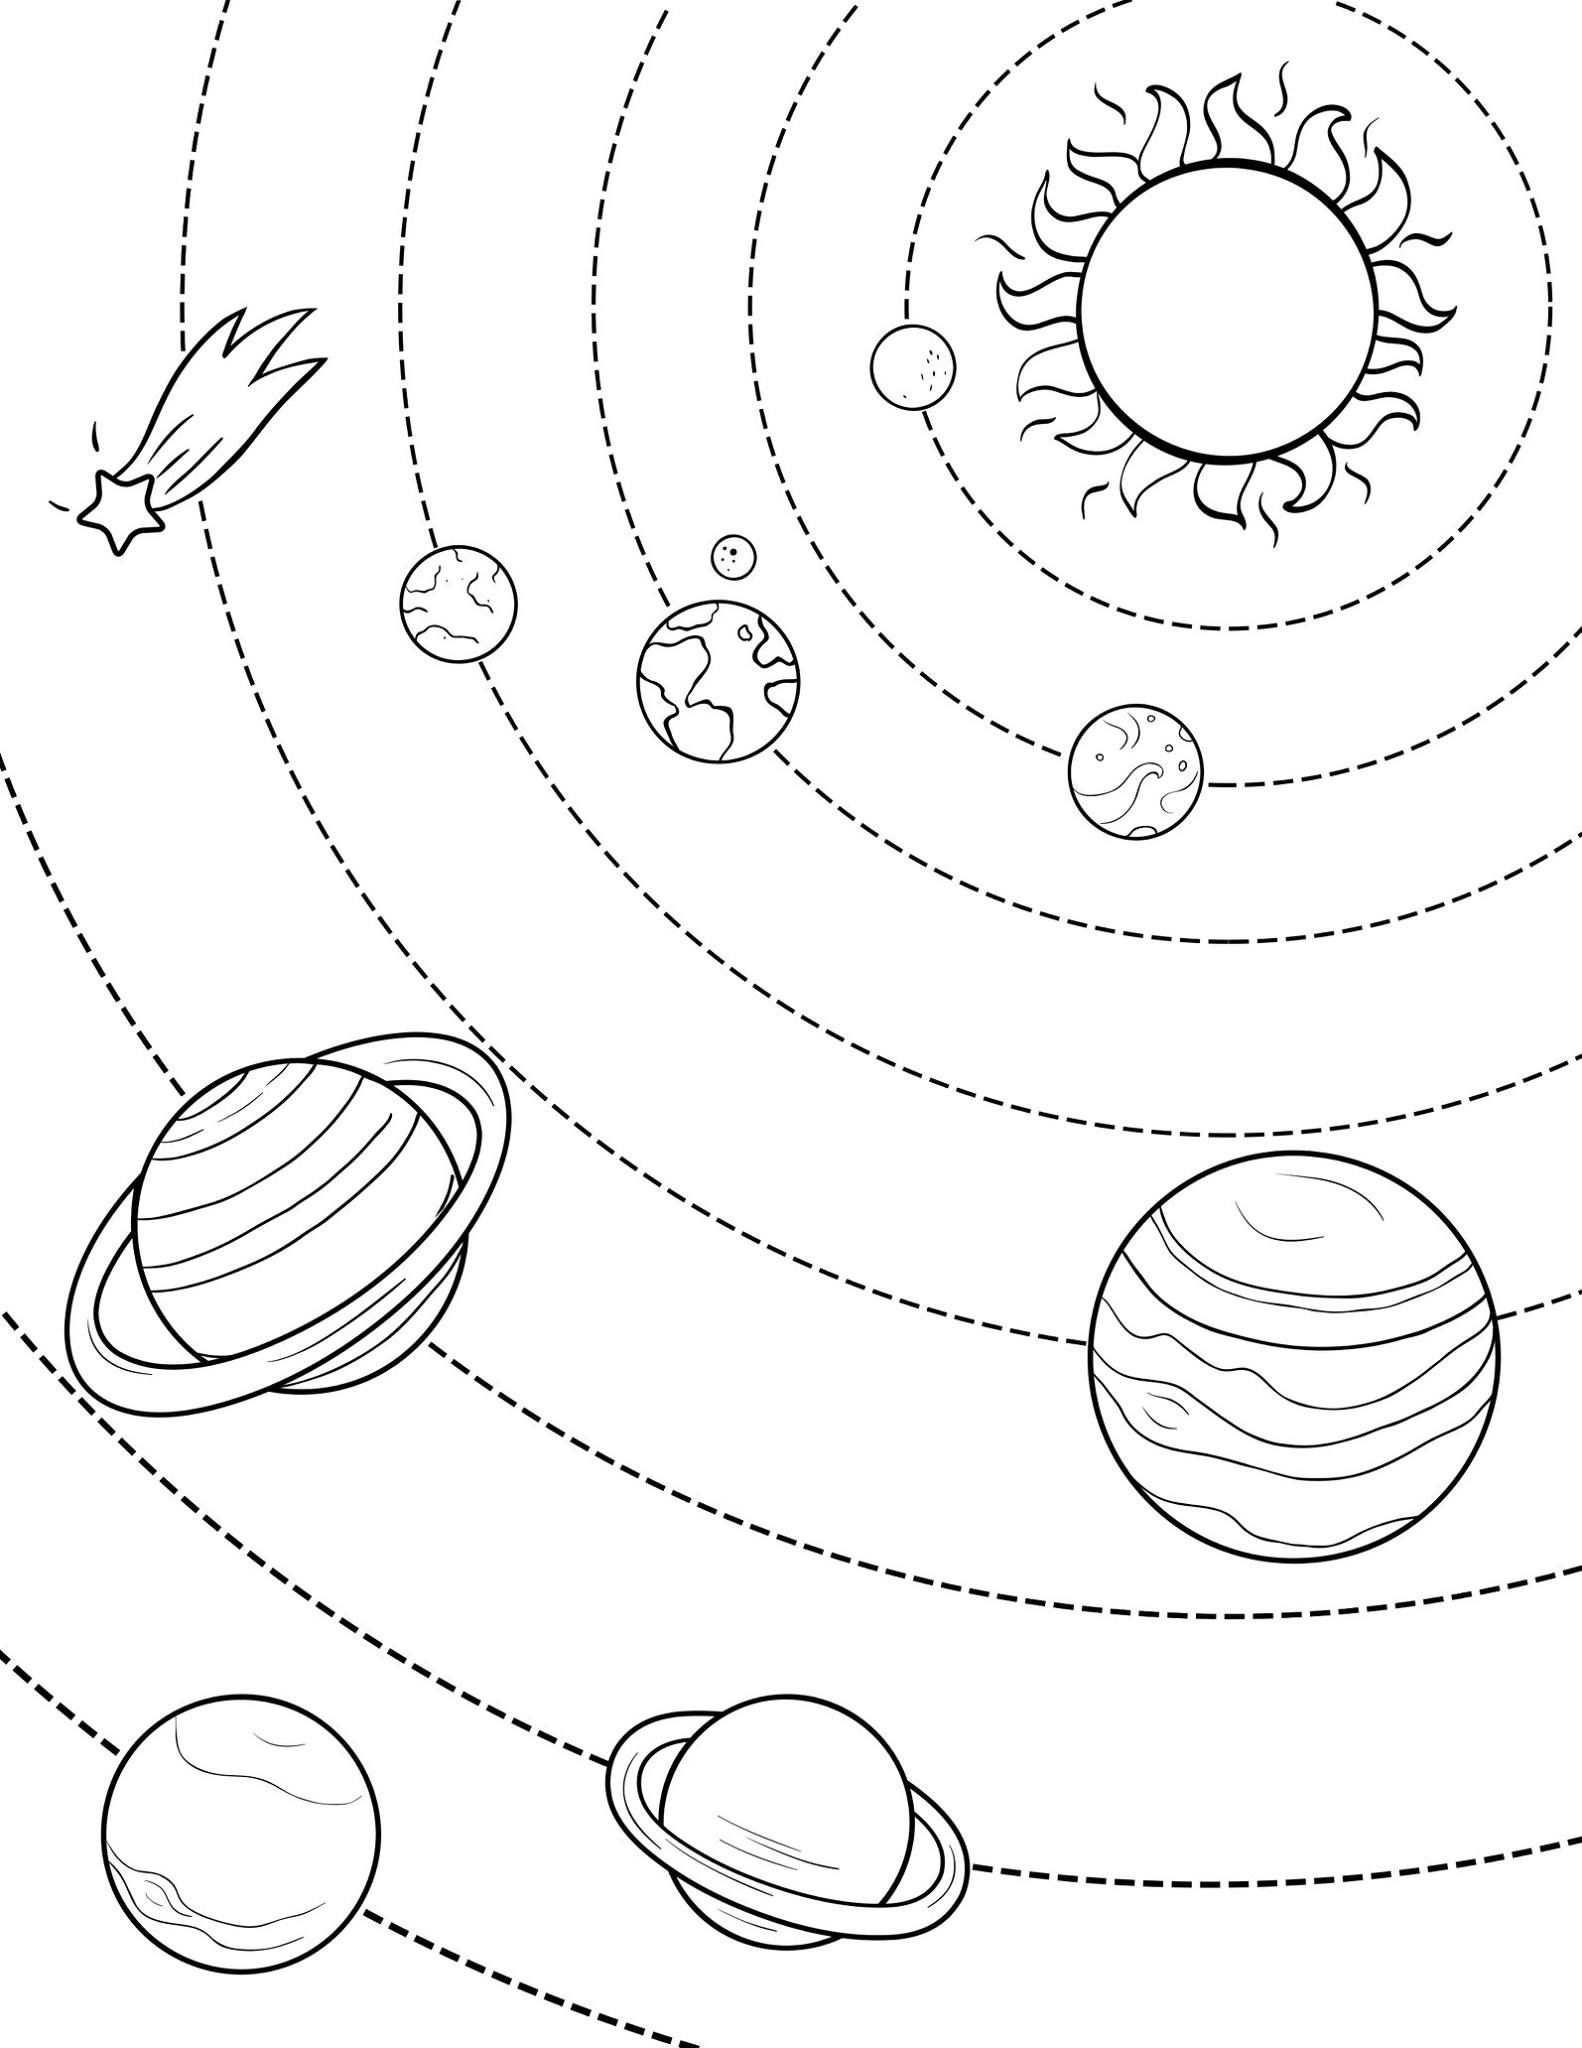 Pin By Dilara Nrlzkn On Fen Bilimleri | Solar System Coloring Pages dedans Coloriage Planete Systeme Solaire